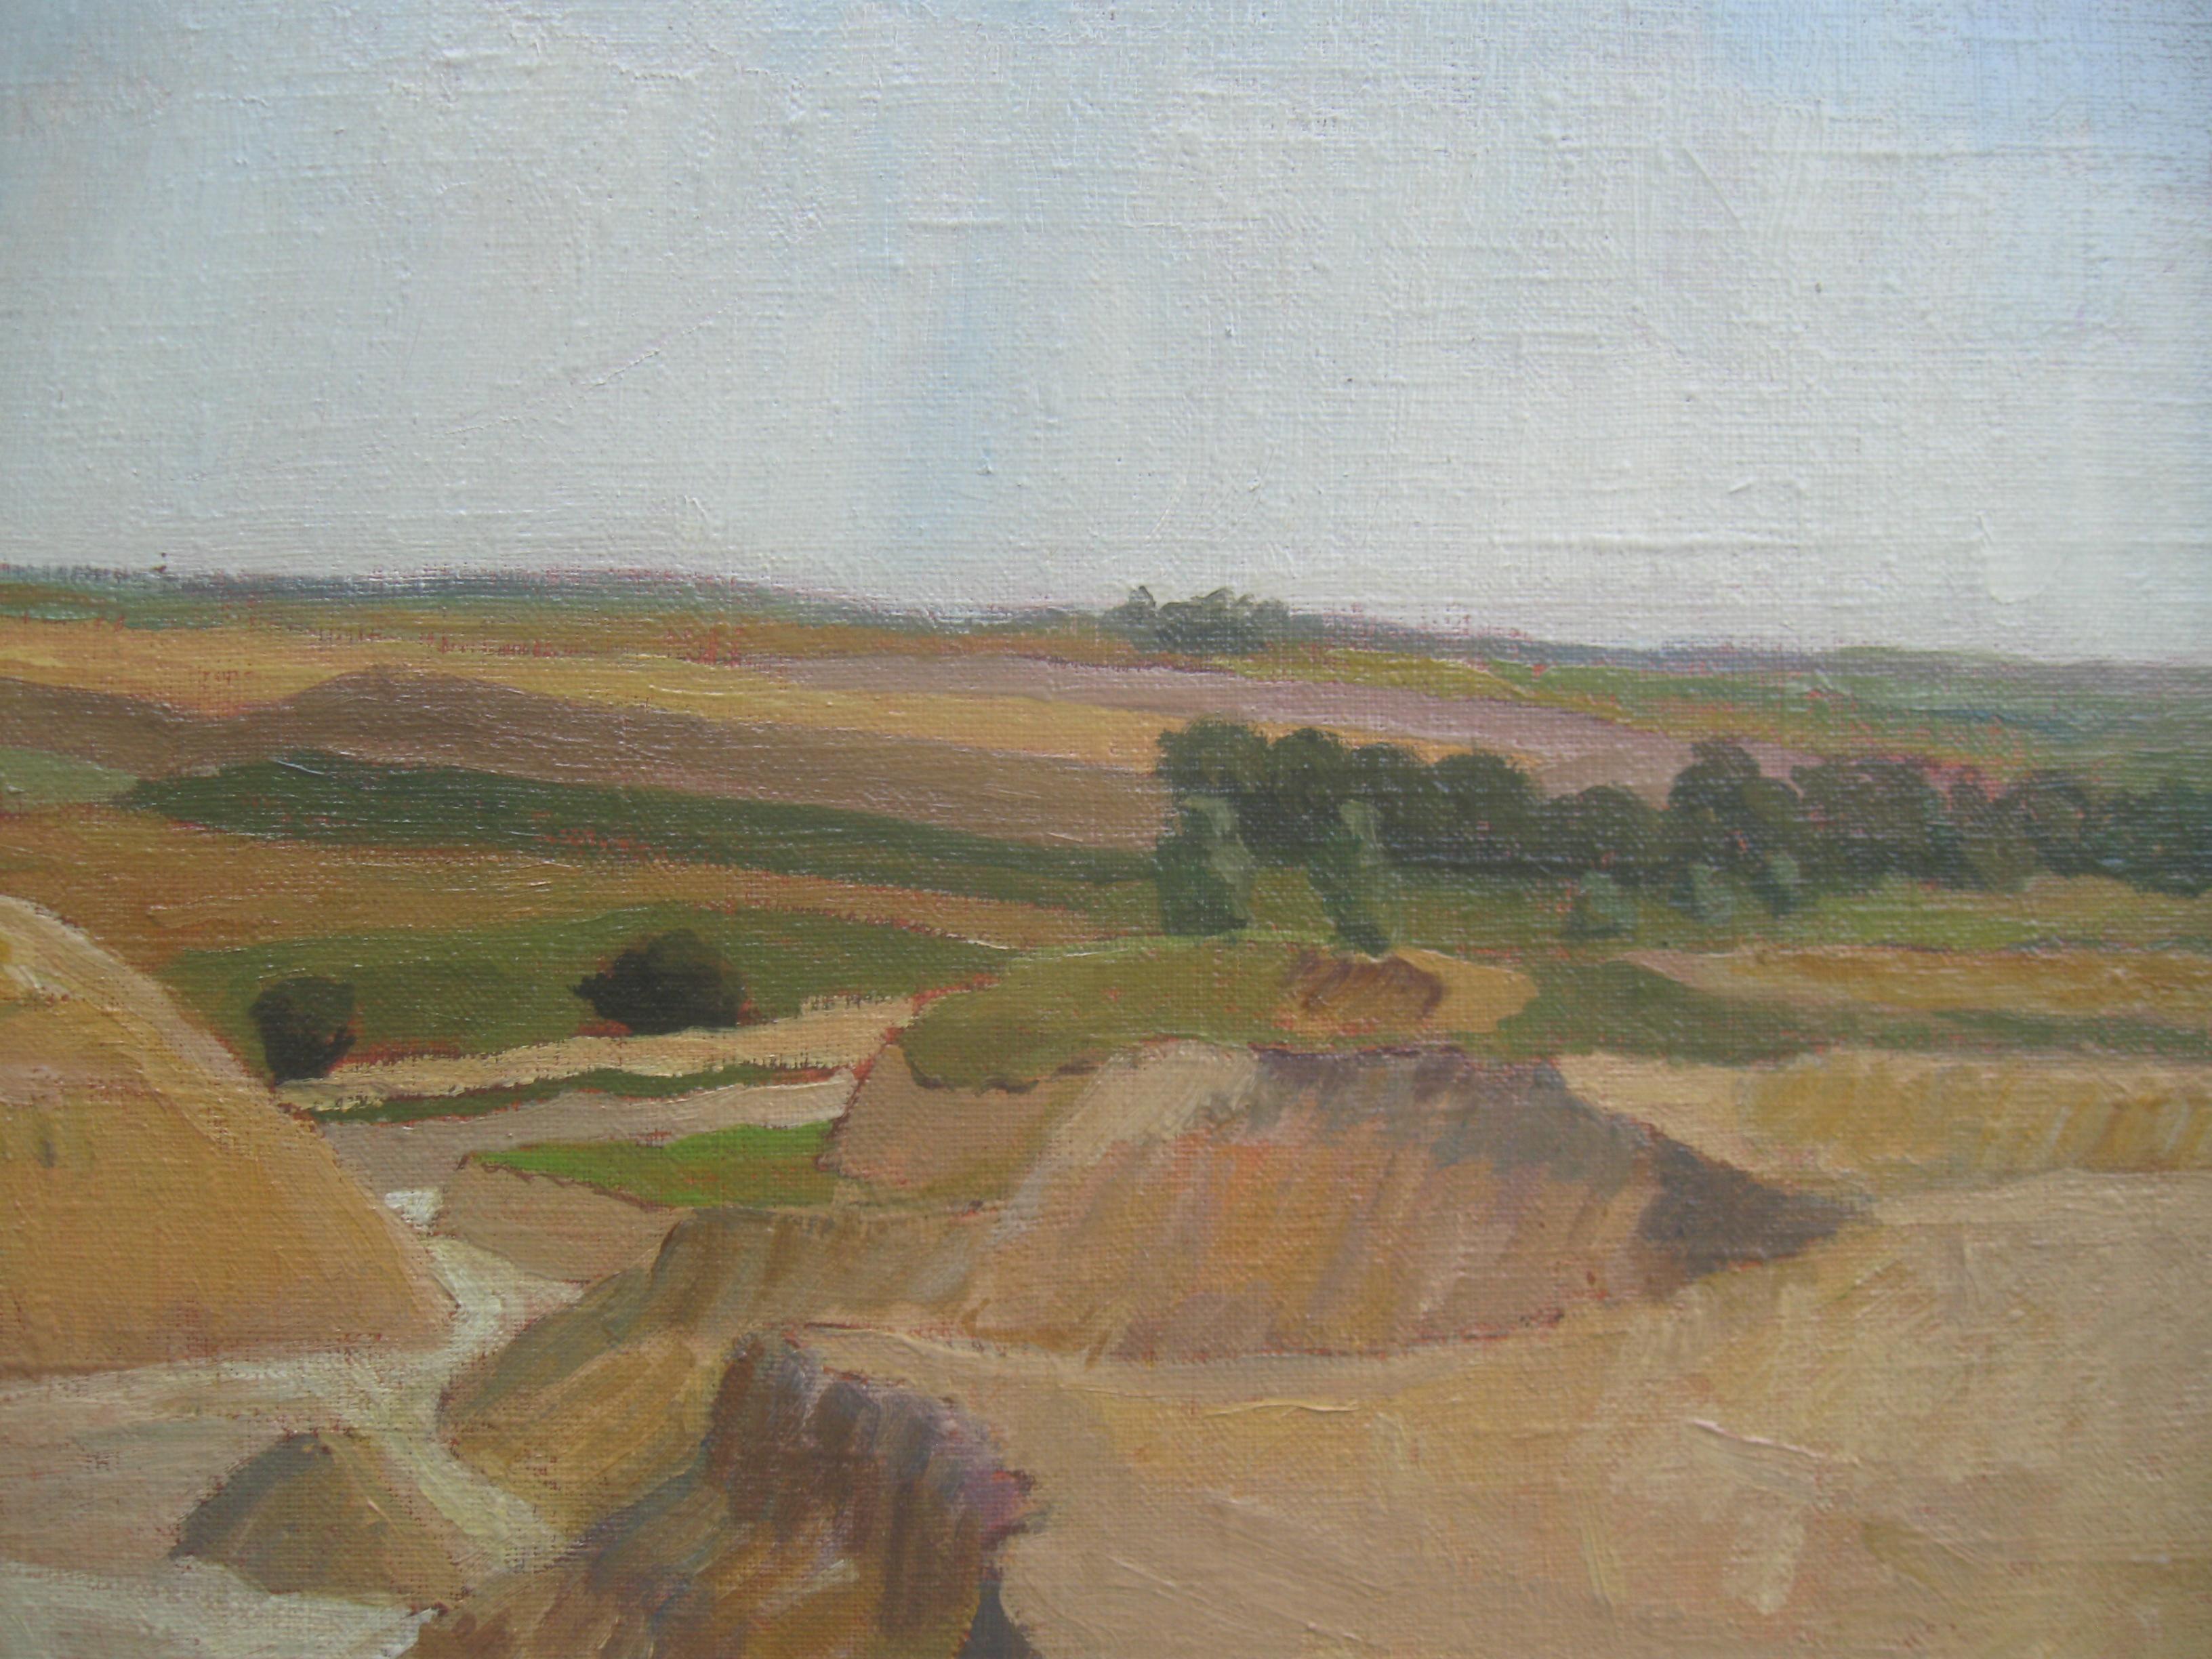 A fine oil by Bengy Hansson ( Danish) circa 1974.
Landscape with a quarry .
An extensive natural landscape interupted by mans activity scaring the natural topography creating artificial cliffs and valleys due to extracting minerals.
Thicky painted